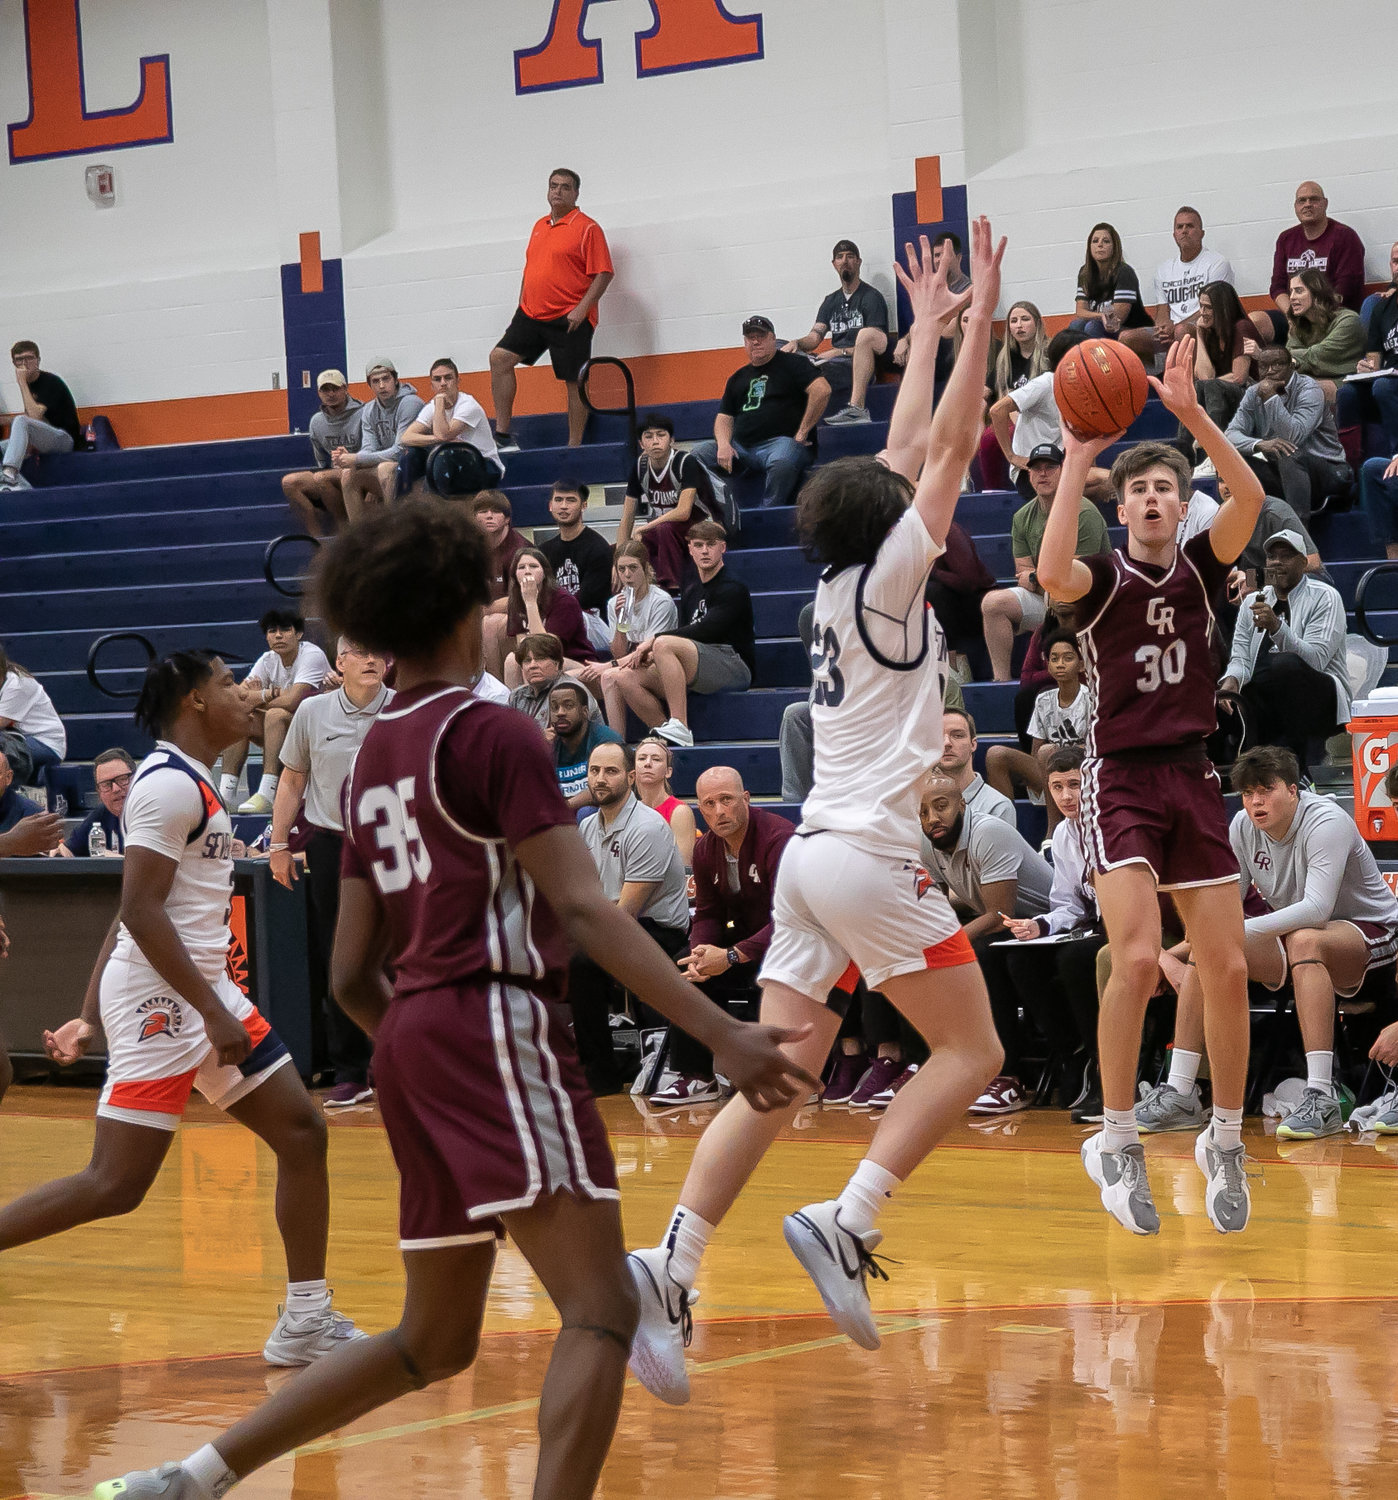 Drew Joyce shoots a 3-pointer during Saturday's game between Seven Lakes and Cinco Ranch at the Seven Lakes gym.